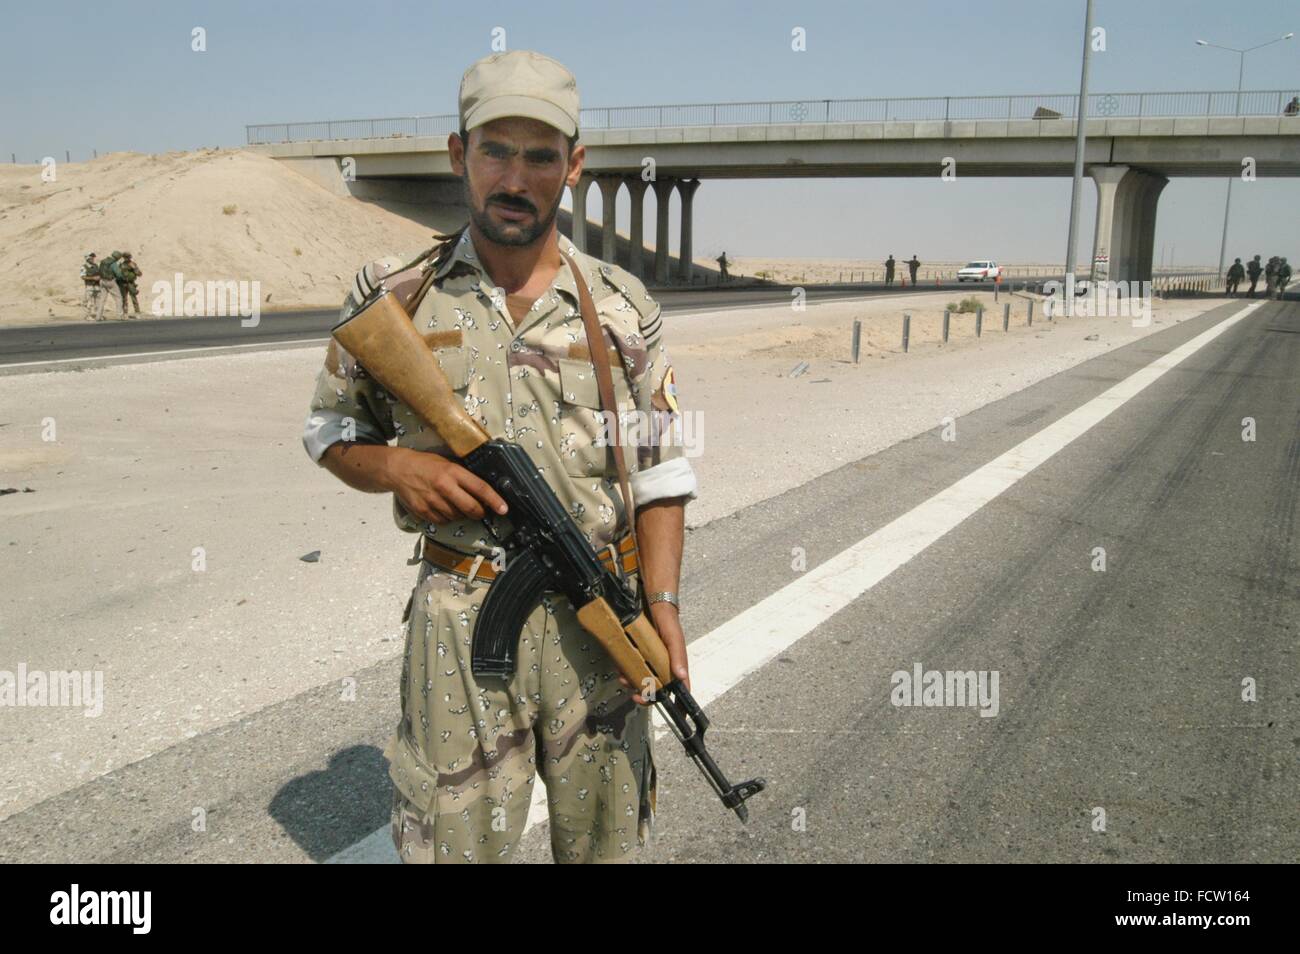 New reconstituted Iraqi army after the 2003 war, checkpoint on the highway Basra - Nasiriya Stock Photo